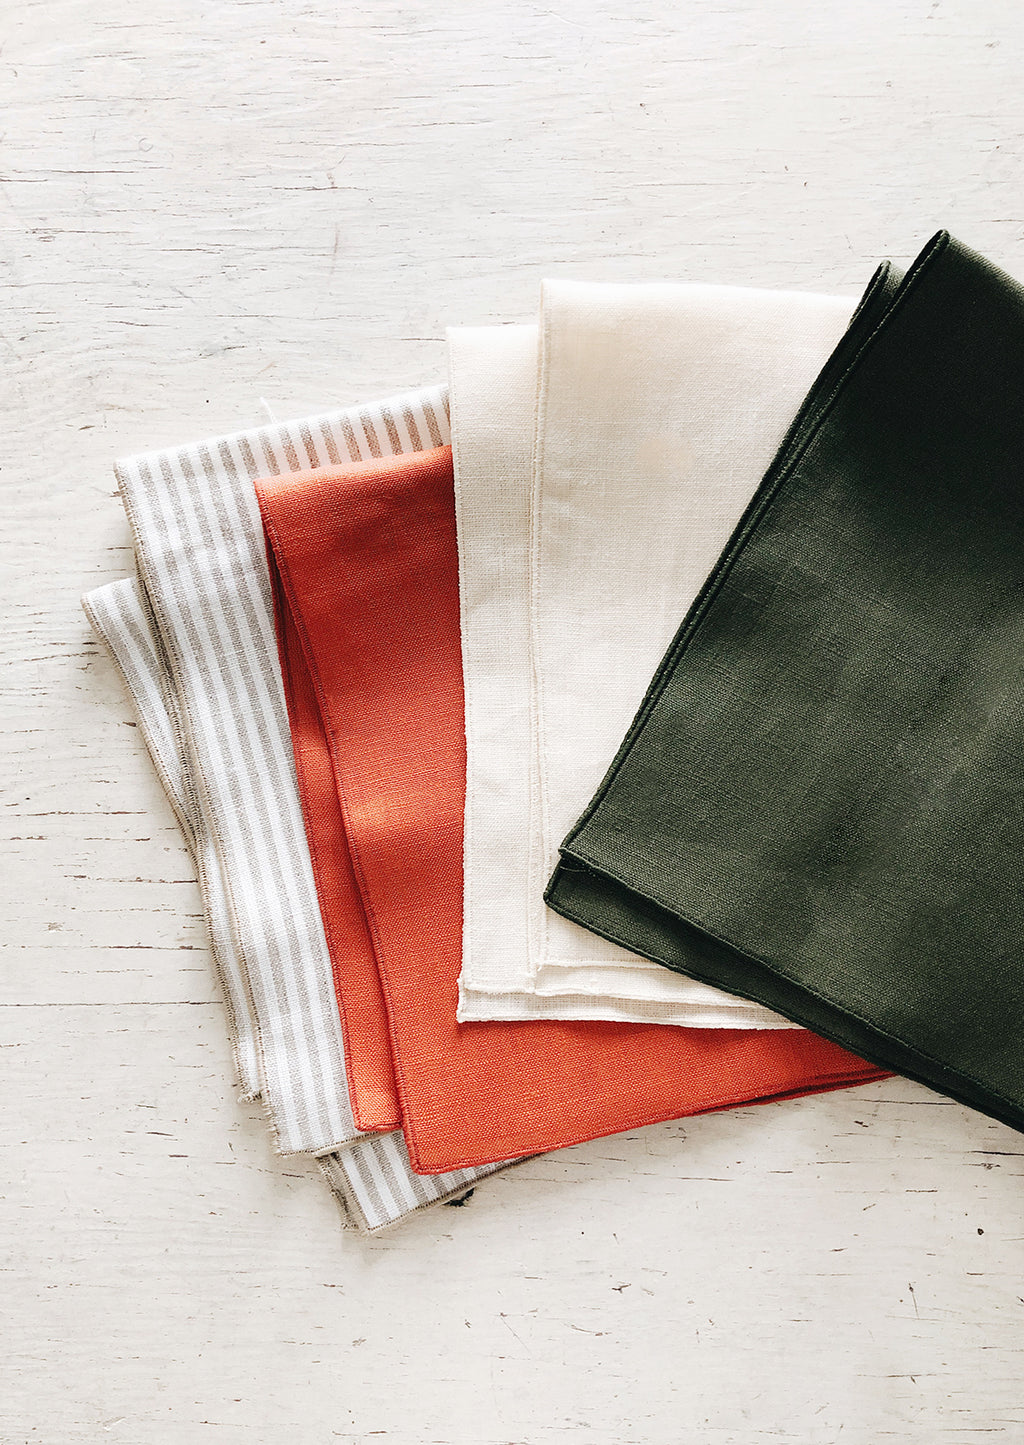 Tomato: Linen Napkins splayed out in an array of colors.